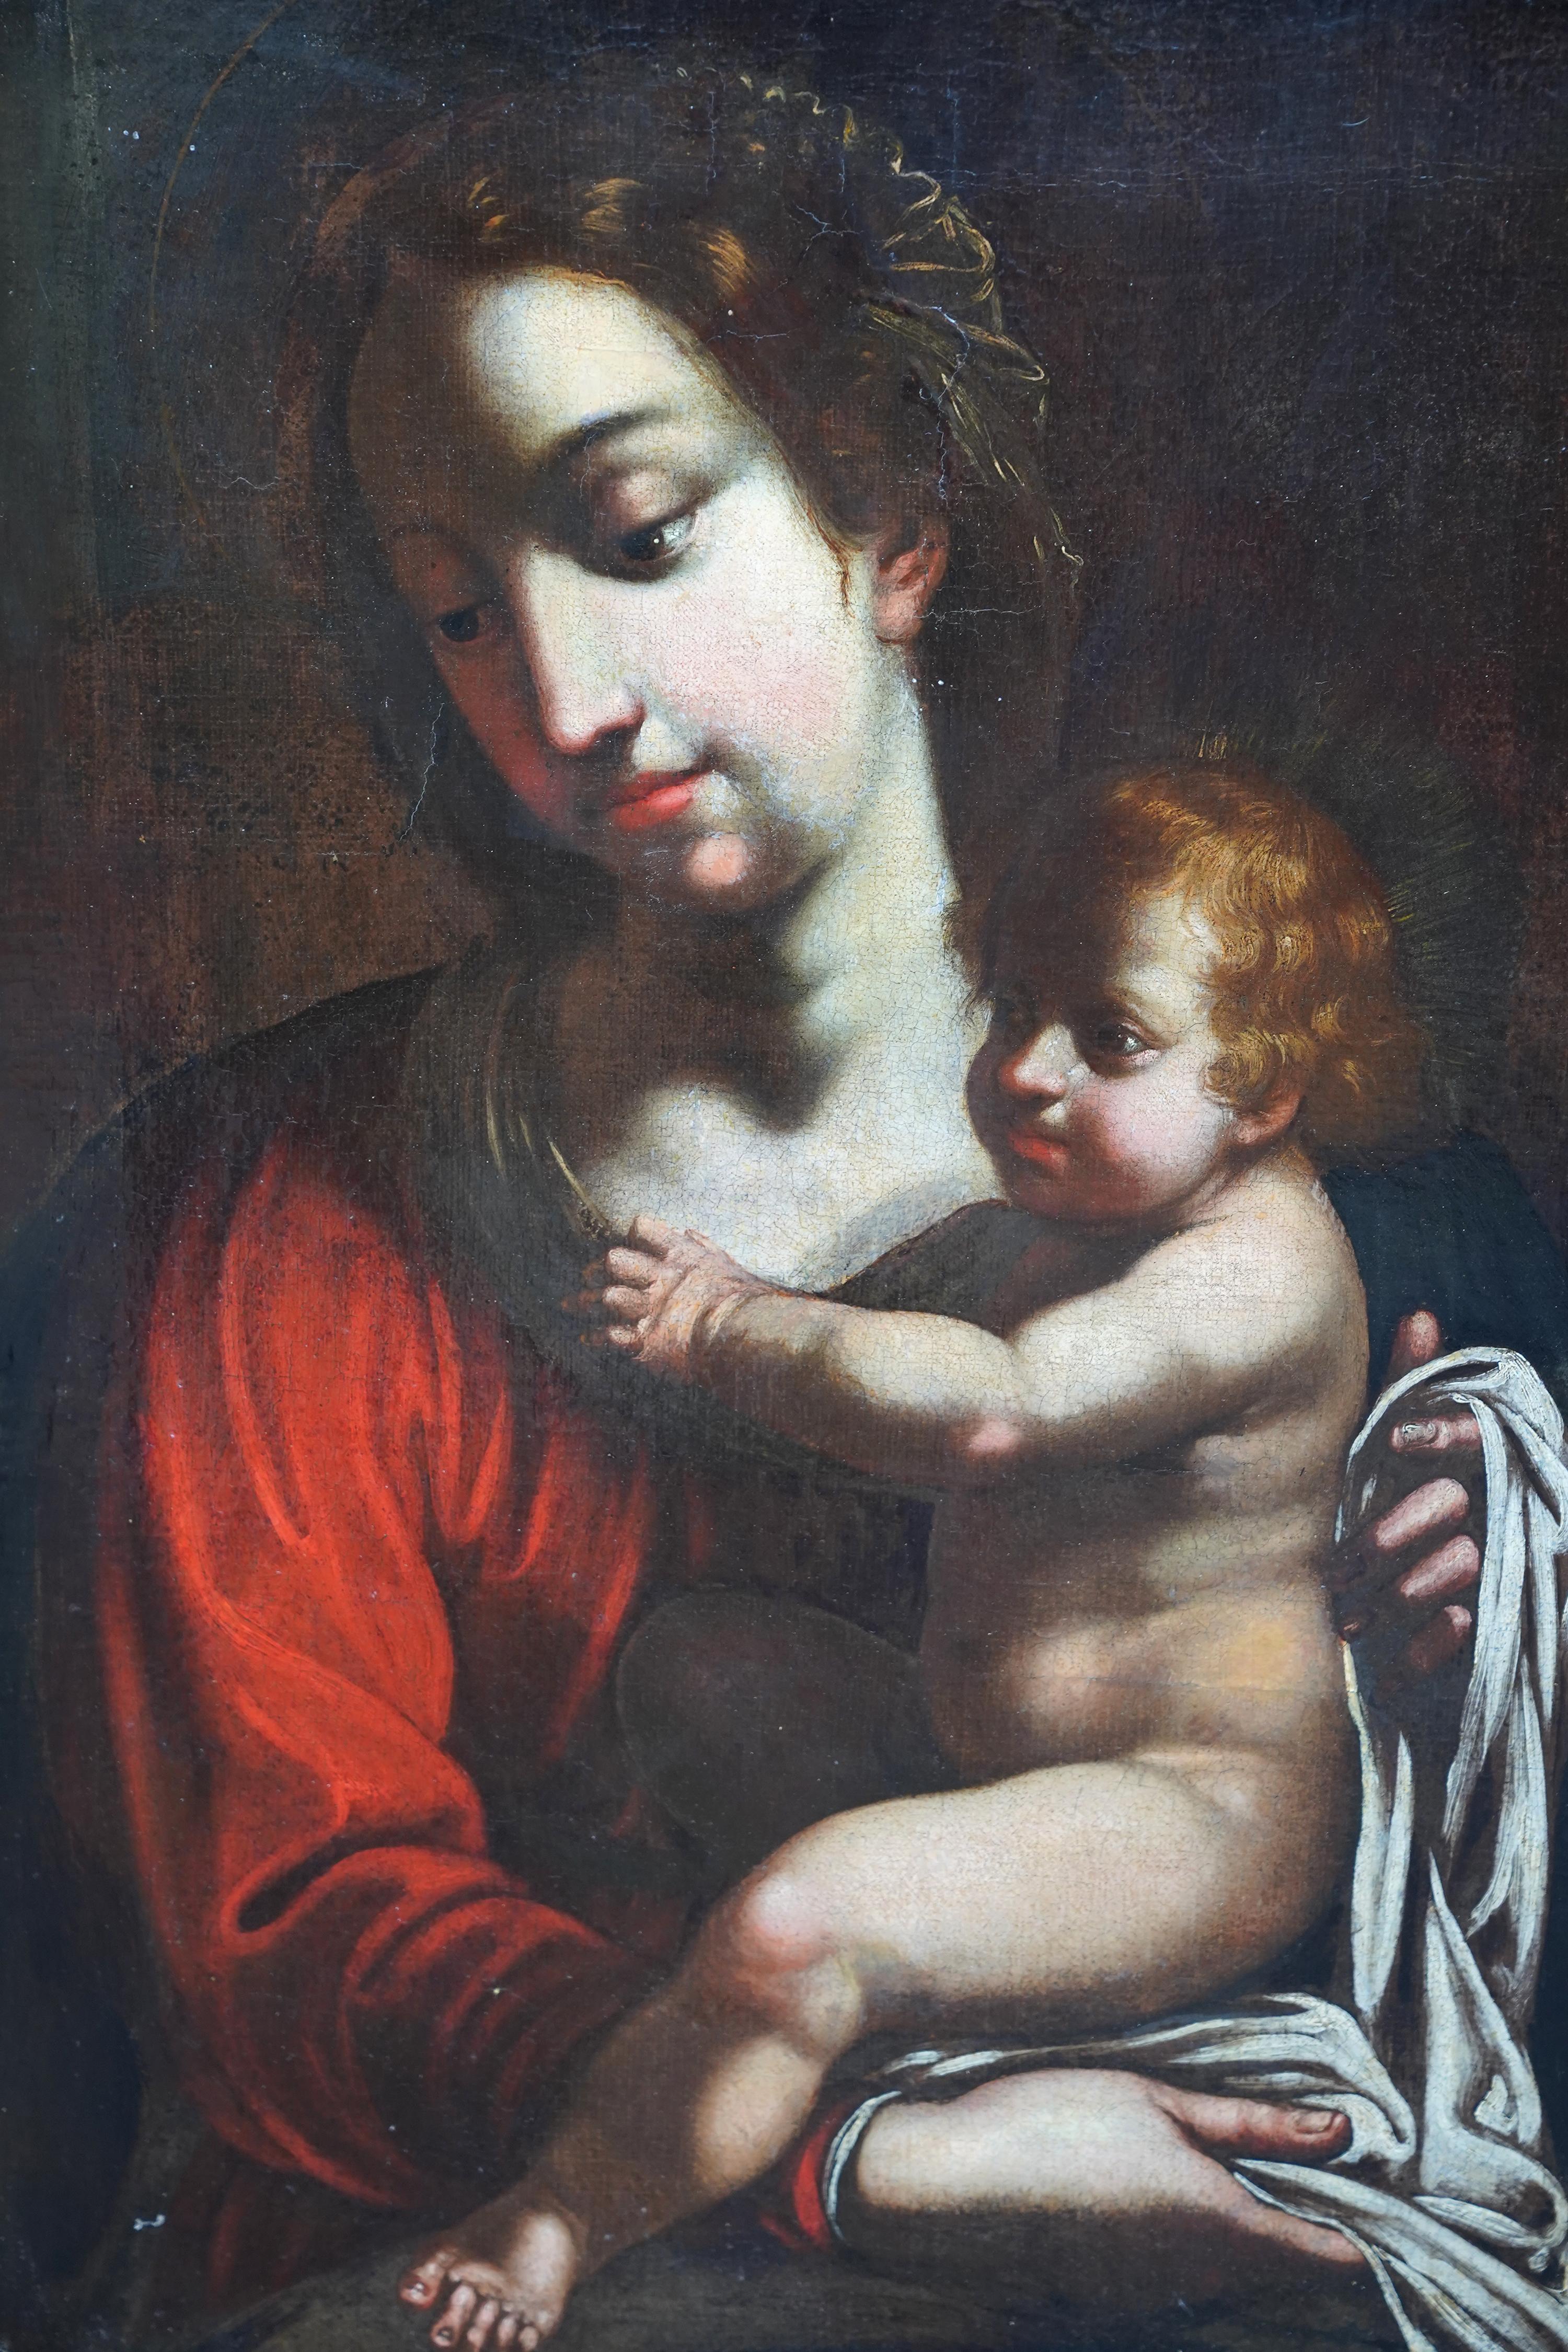 This superb Italian Old Master religious portrait oil painting is attributed to circle of Bartolomeo Schedoni.  Painted circa 1700 it is a half length portrait of the Madonna holding baby Jesus in her arms and dressed in a rich red robe. The detail